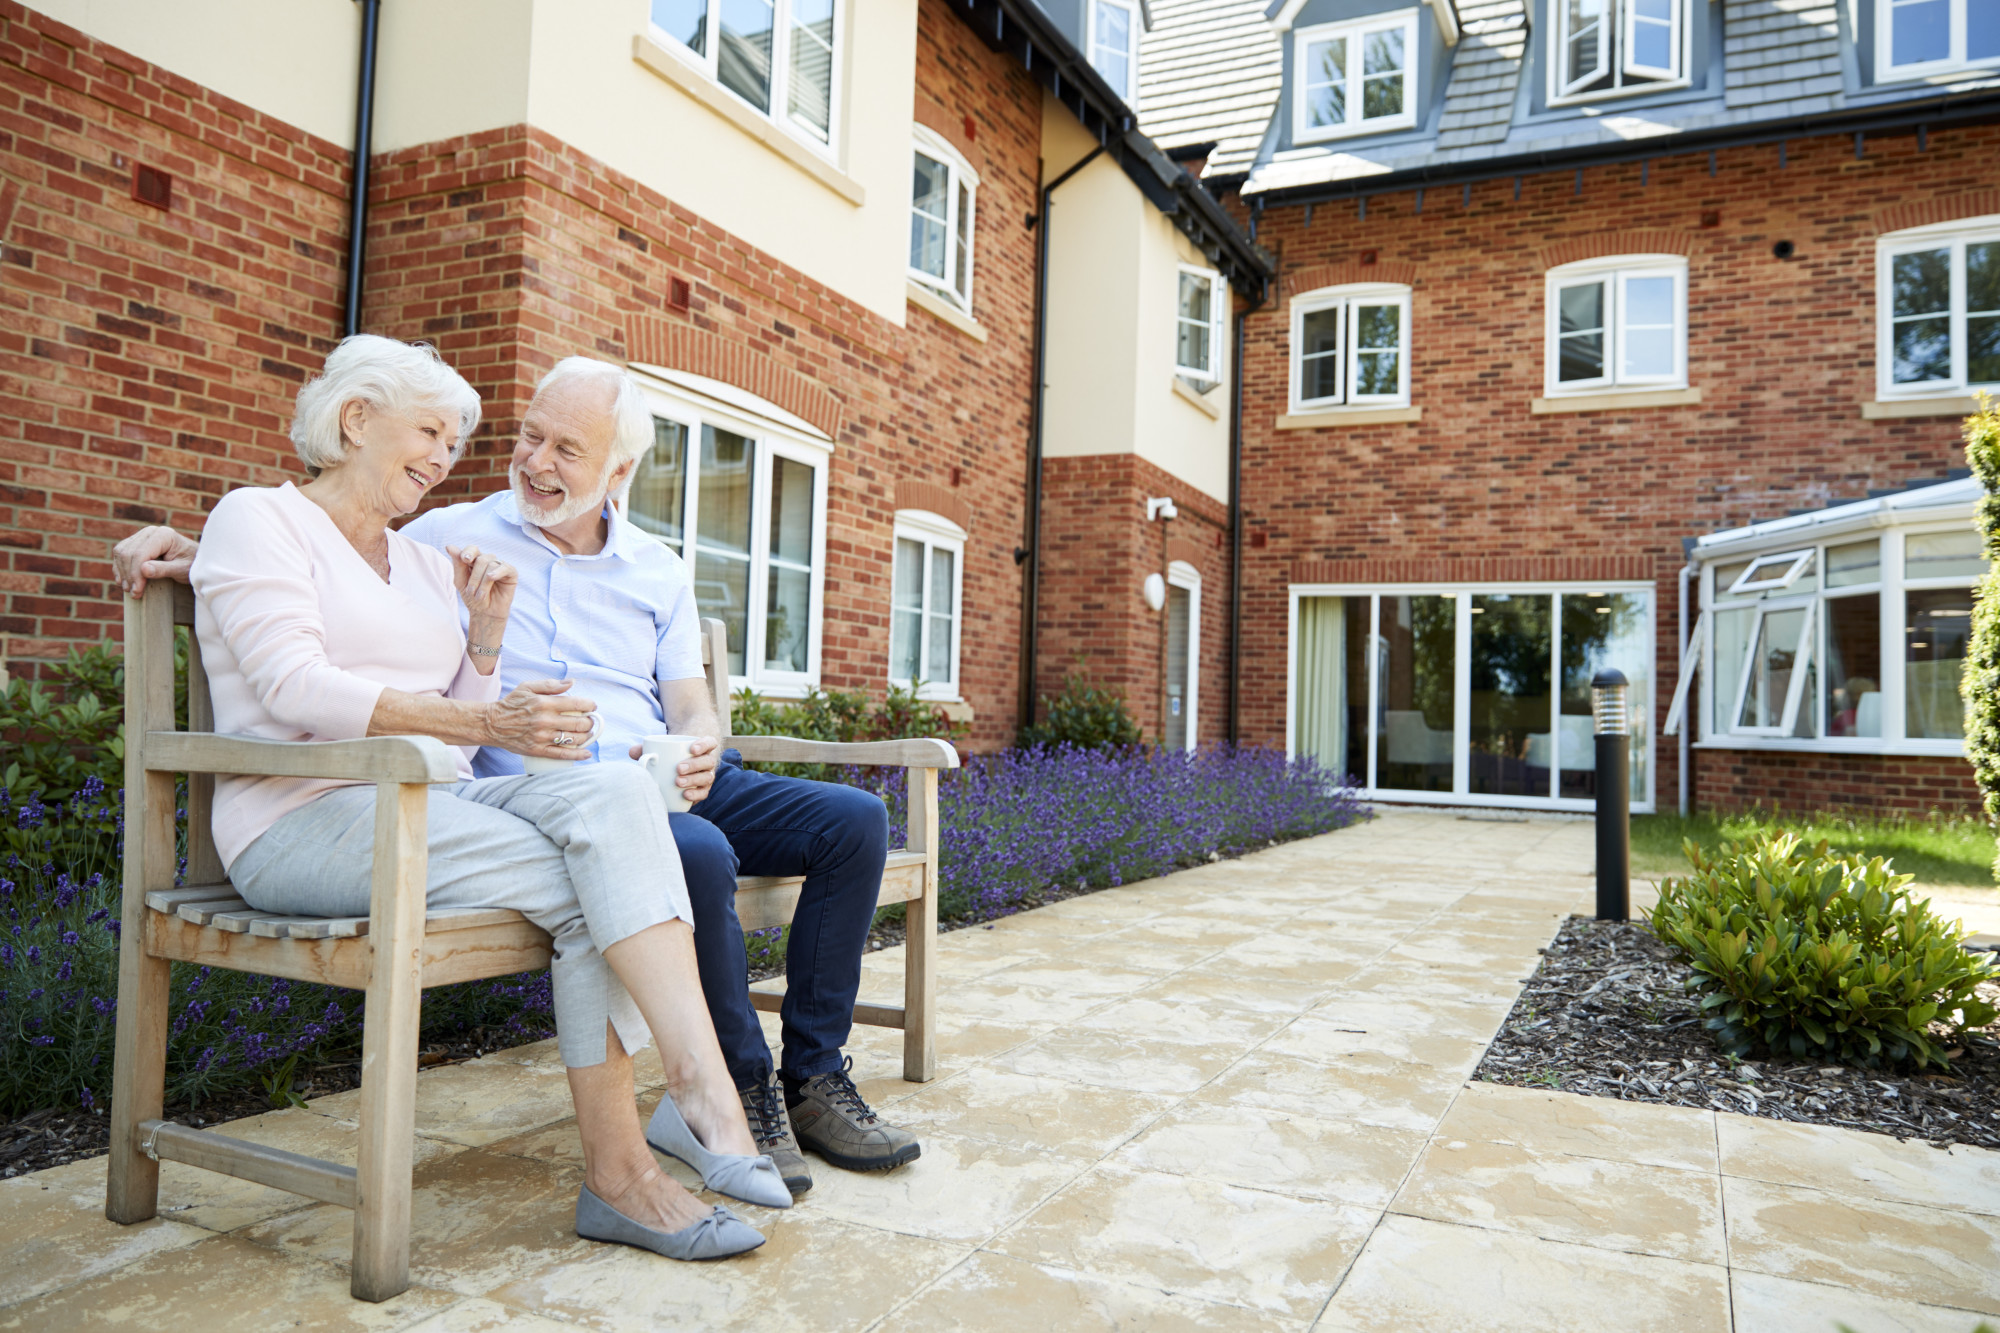 A Guide on How to Find a Great and Affordable Retirement Community